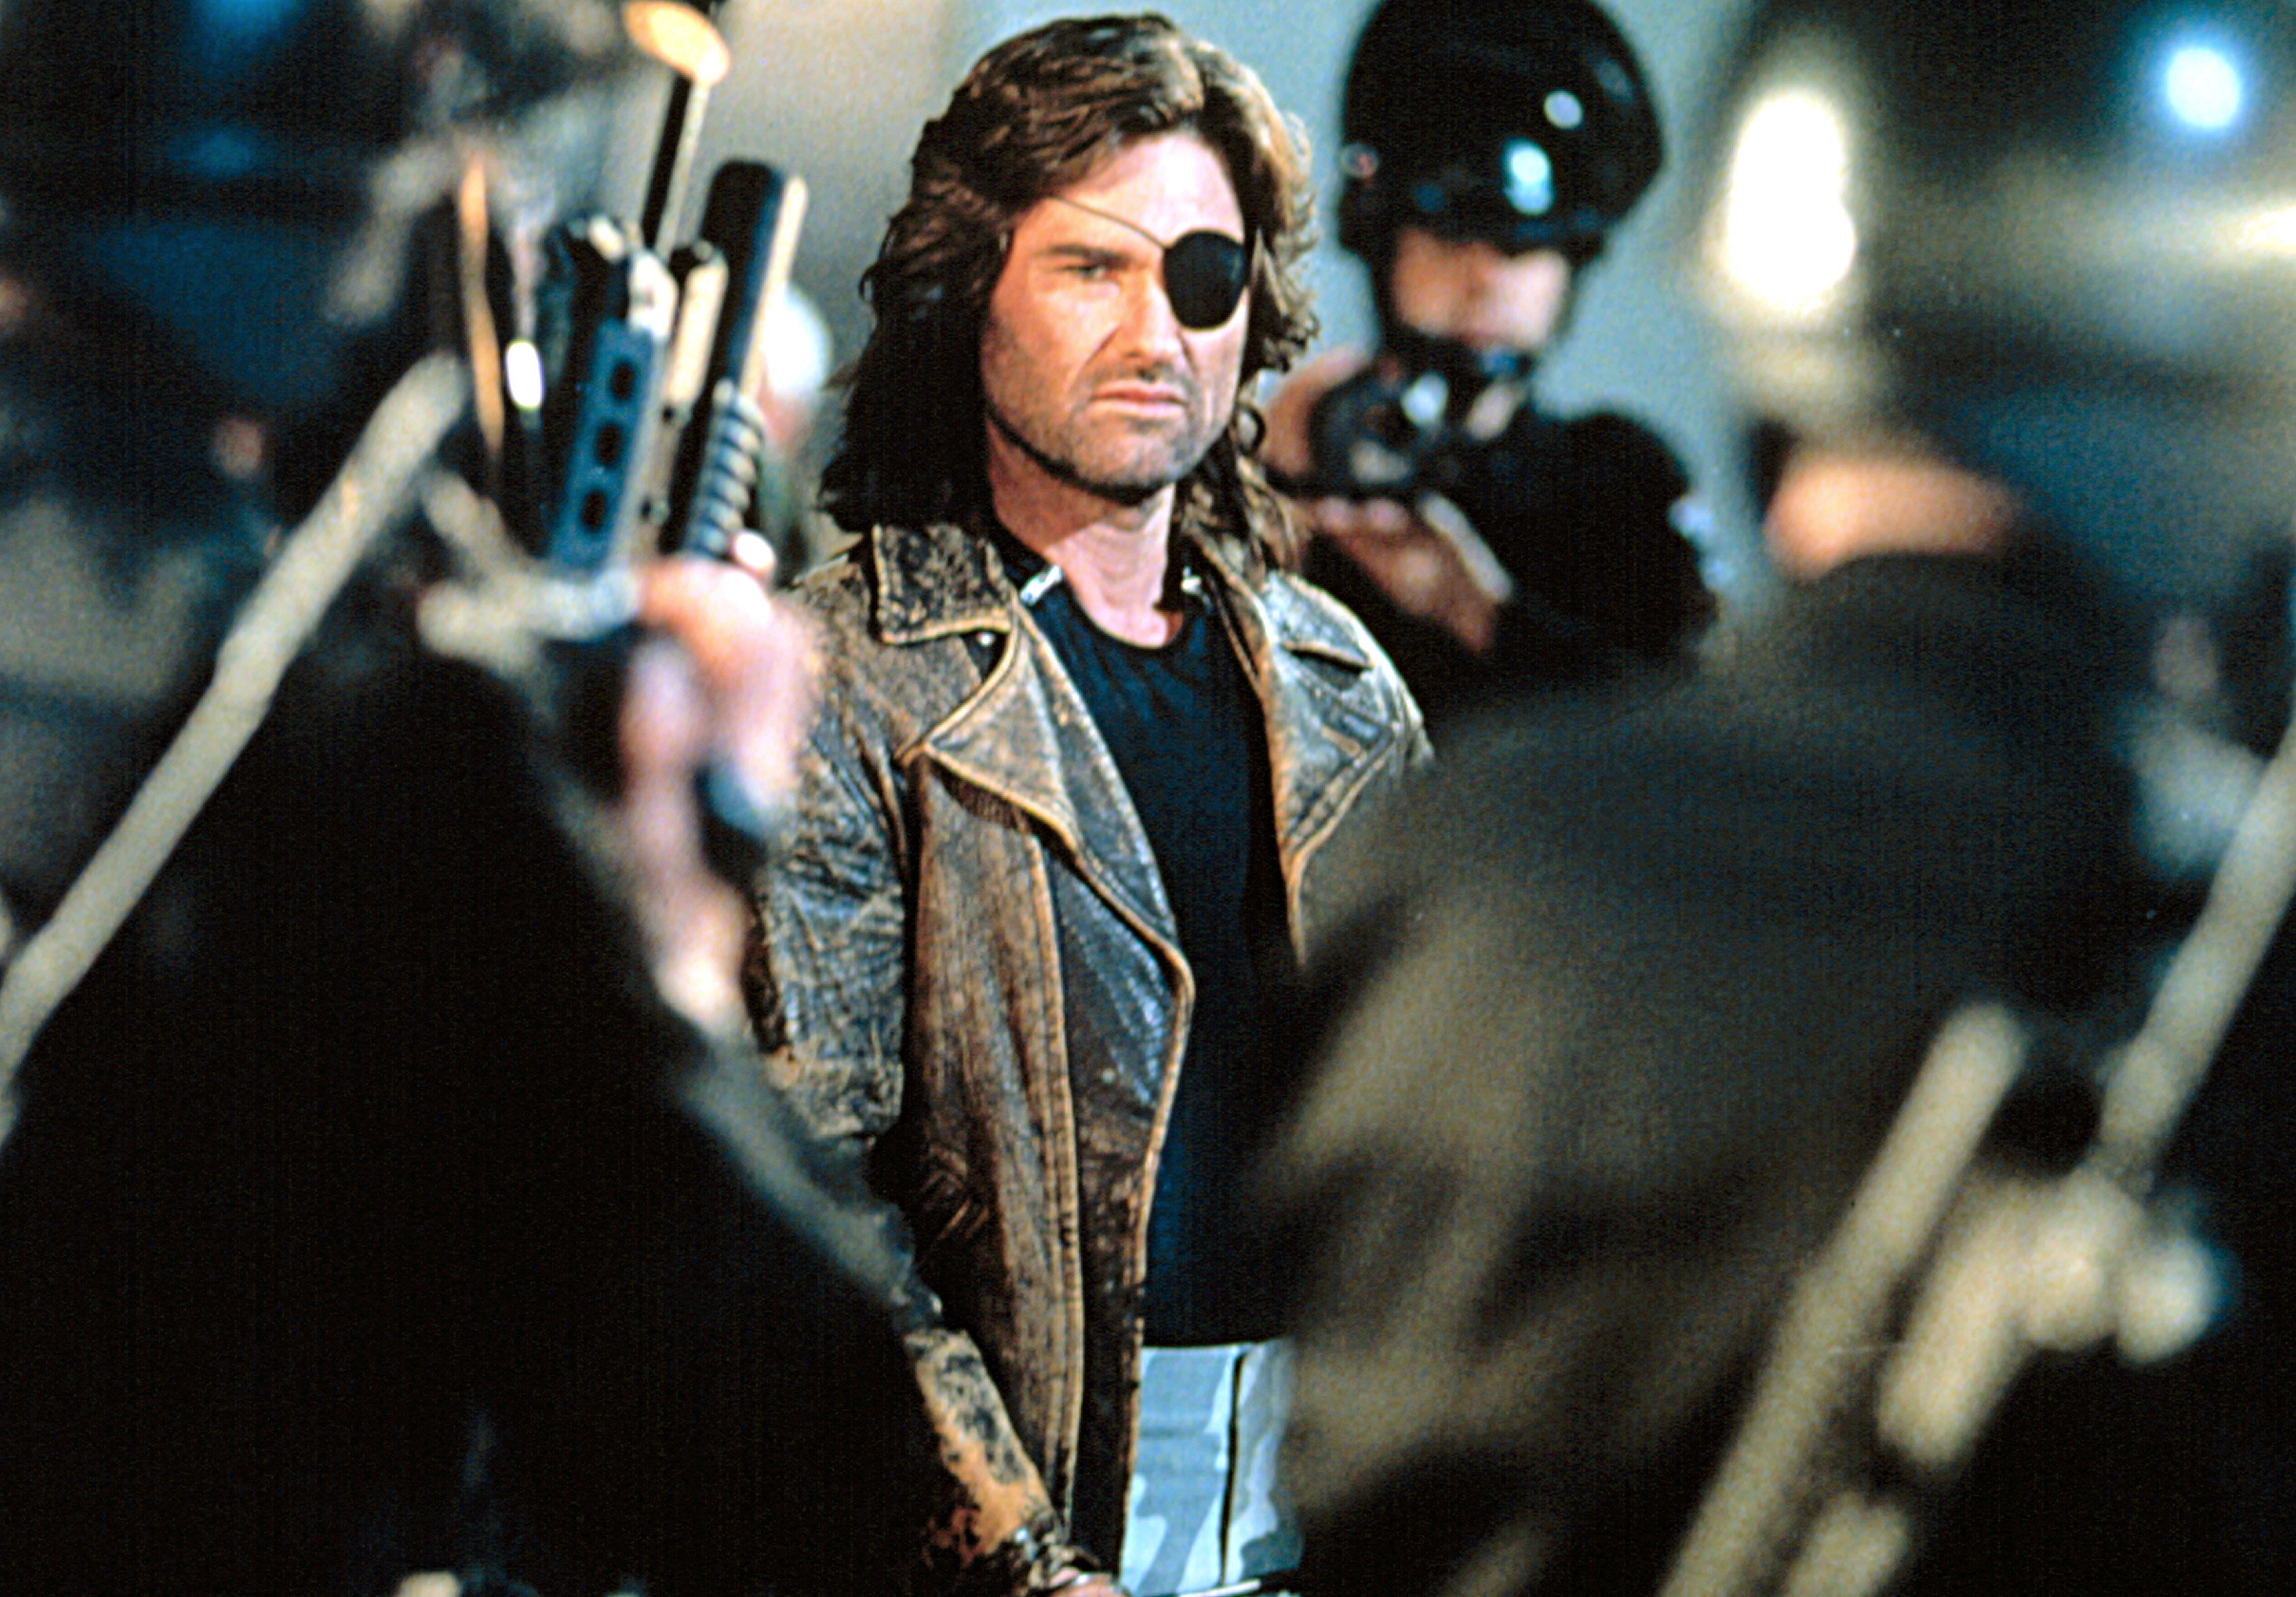 Character Snake Plissken stands defiantly surrounded by armed guards in a scene from the film &quot;Escape from New York.&quot;